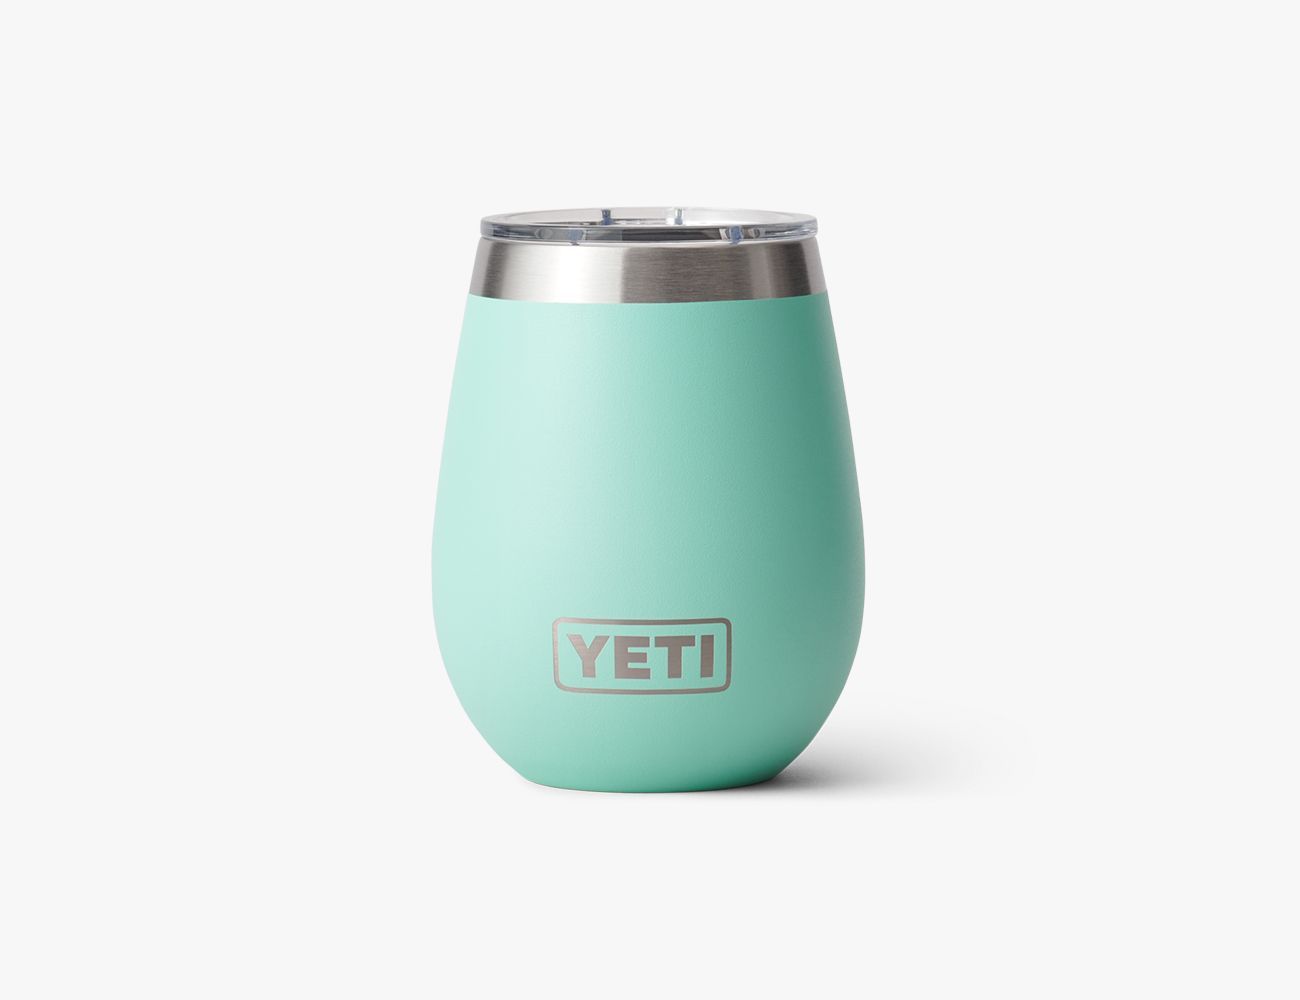 Here Are the Best Cyber Monday Deals You Can Score on Yeti